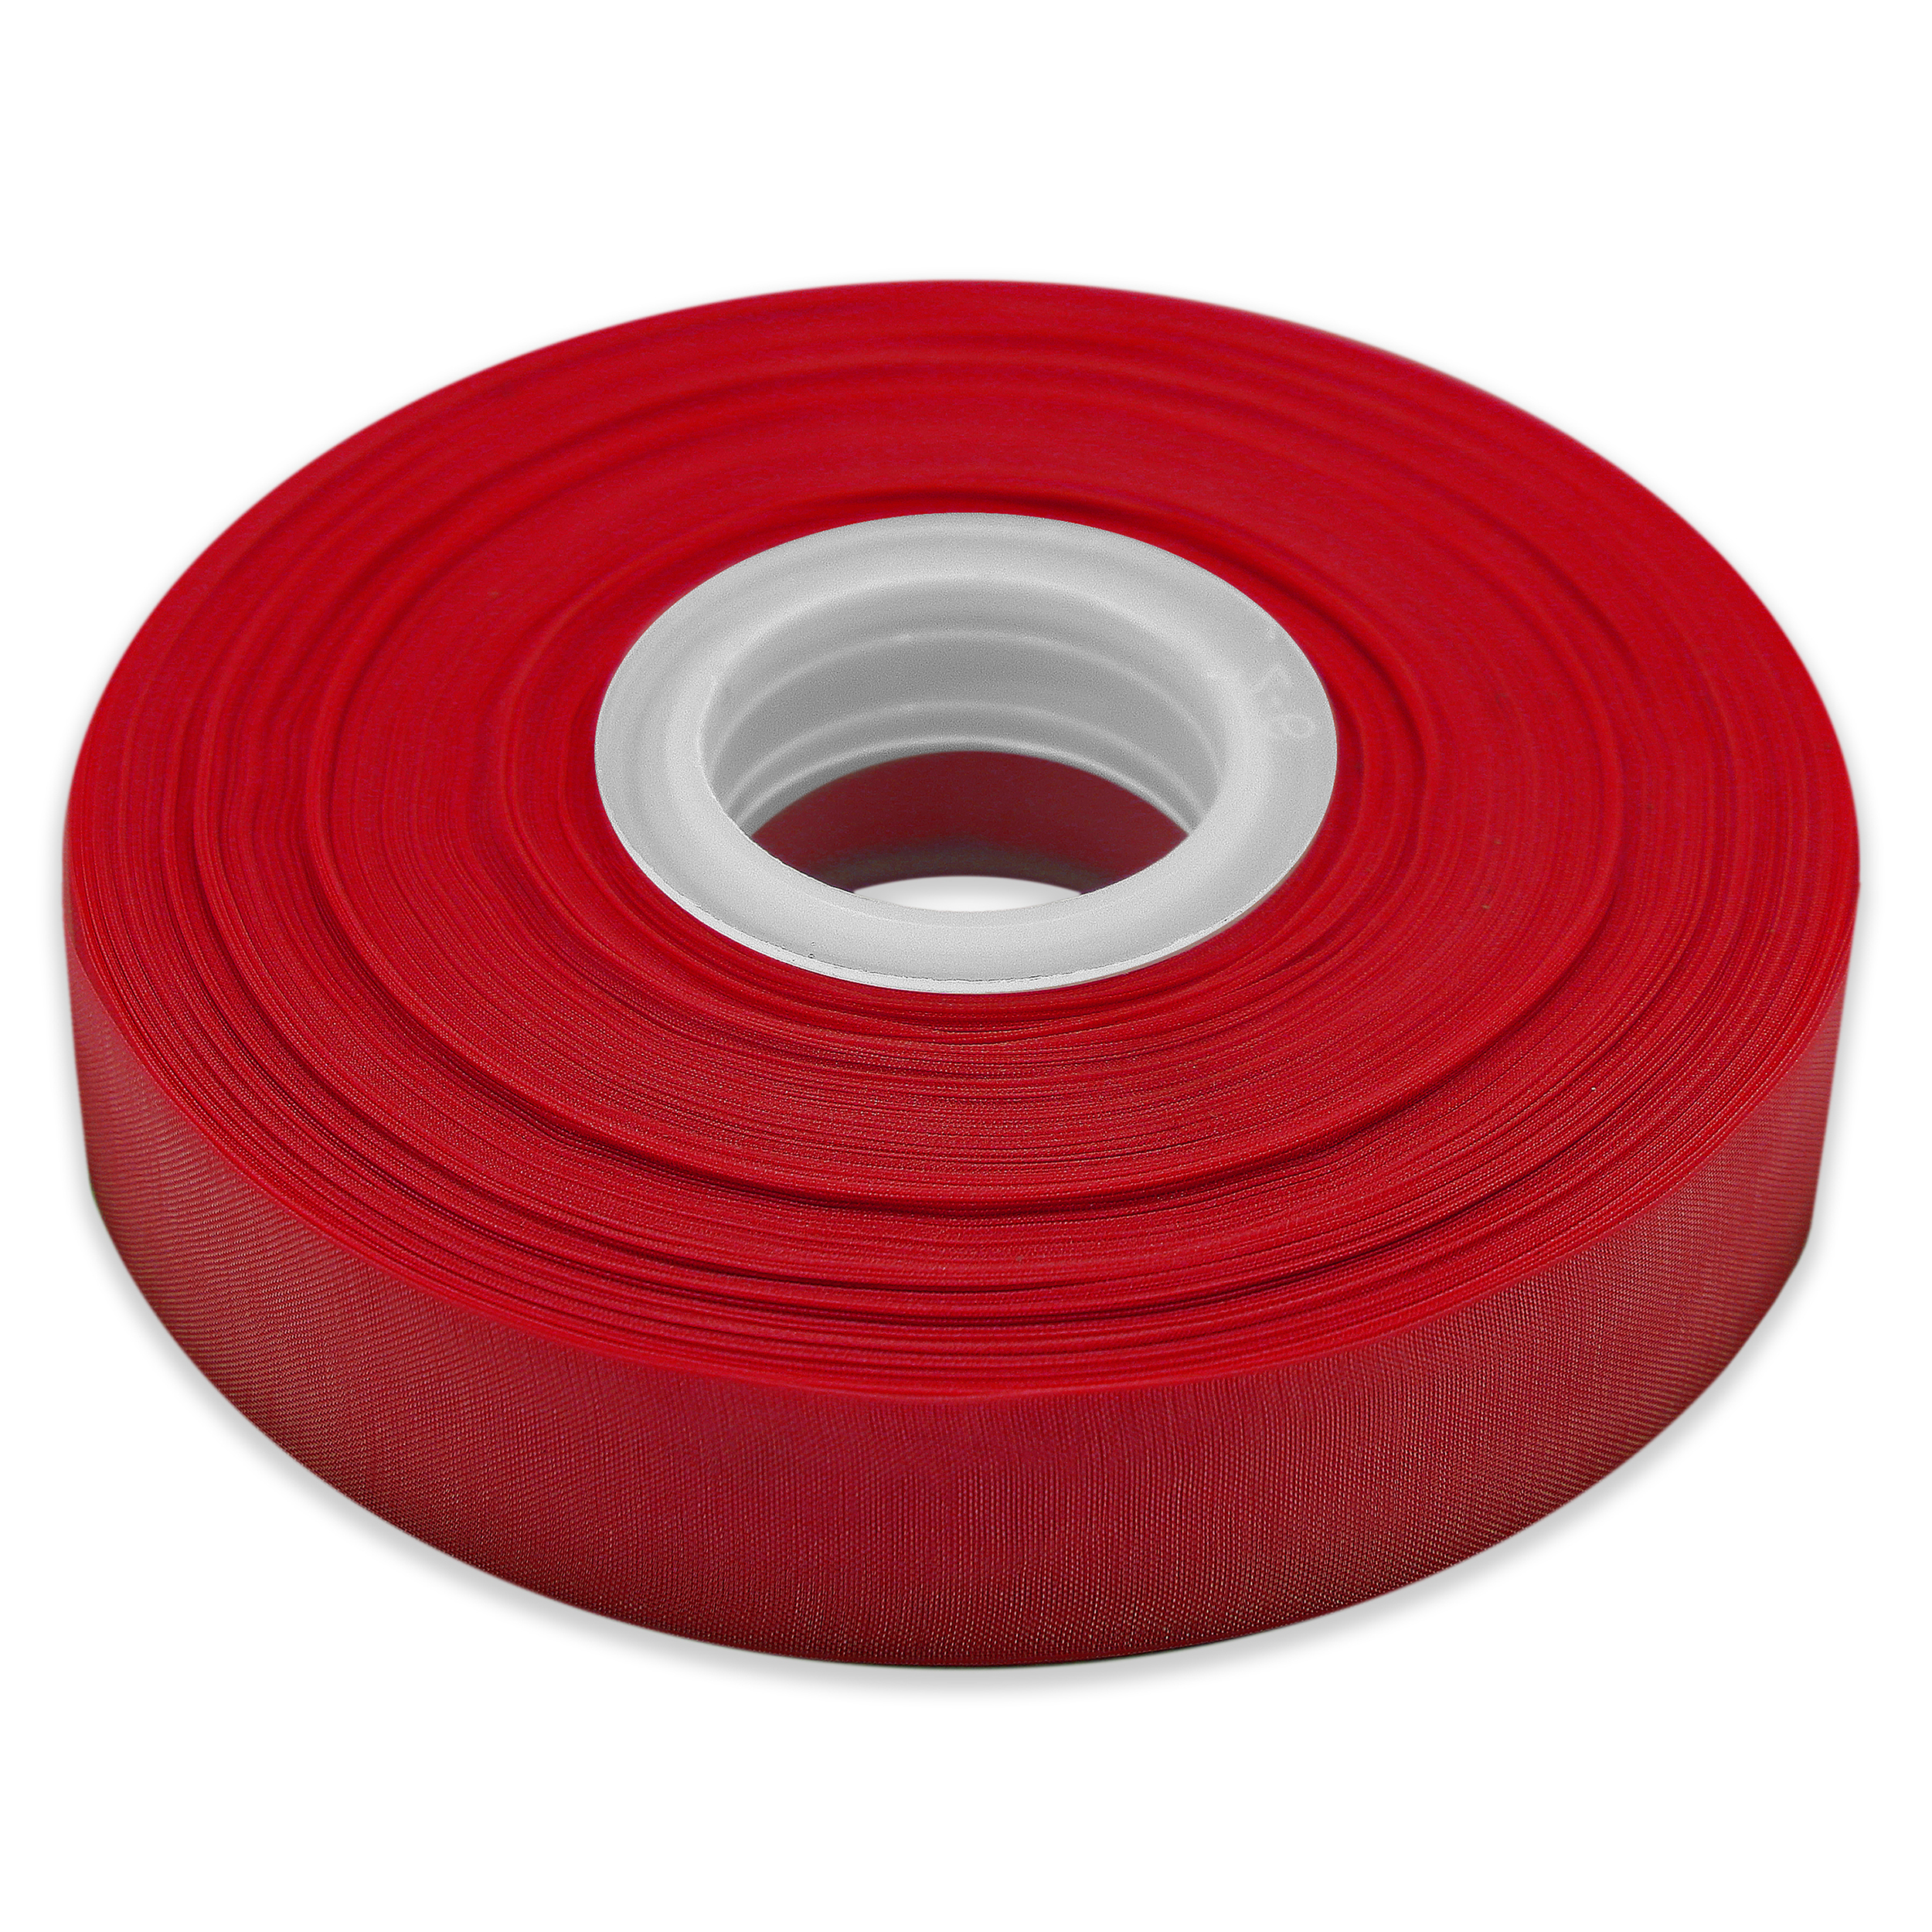 Red Sheer Organza Ribbon for Crafts and Gift Wrap, 7/8" x 100 Yards by Gwen Studios - image 2 of 4